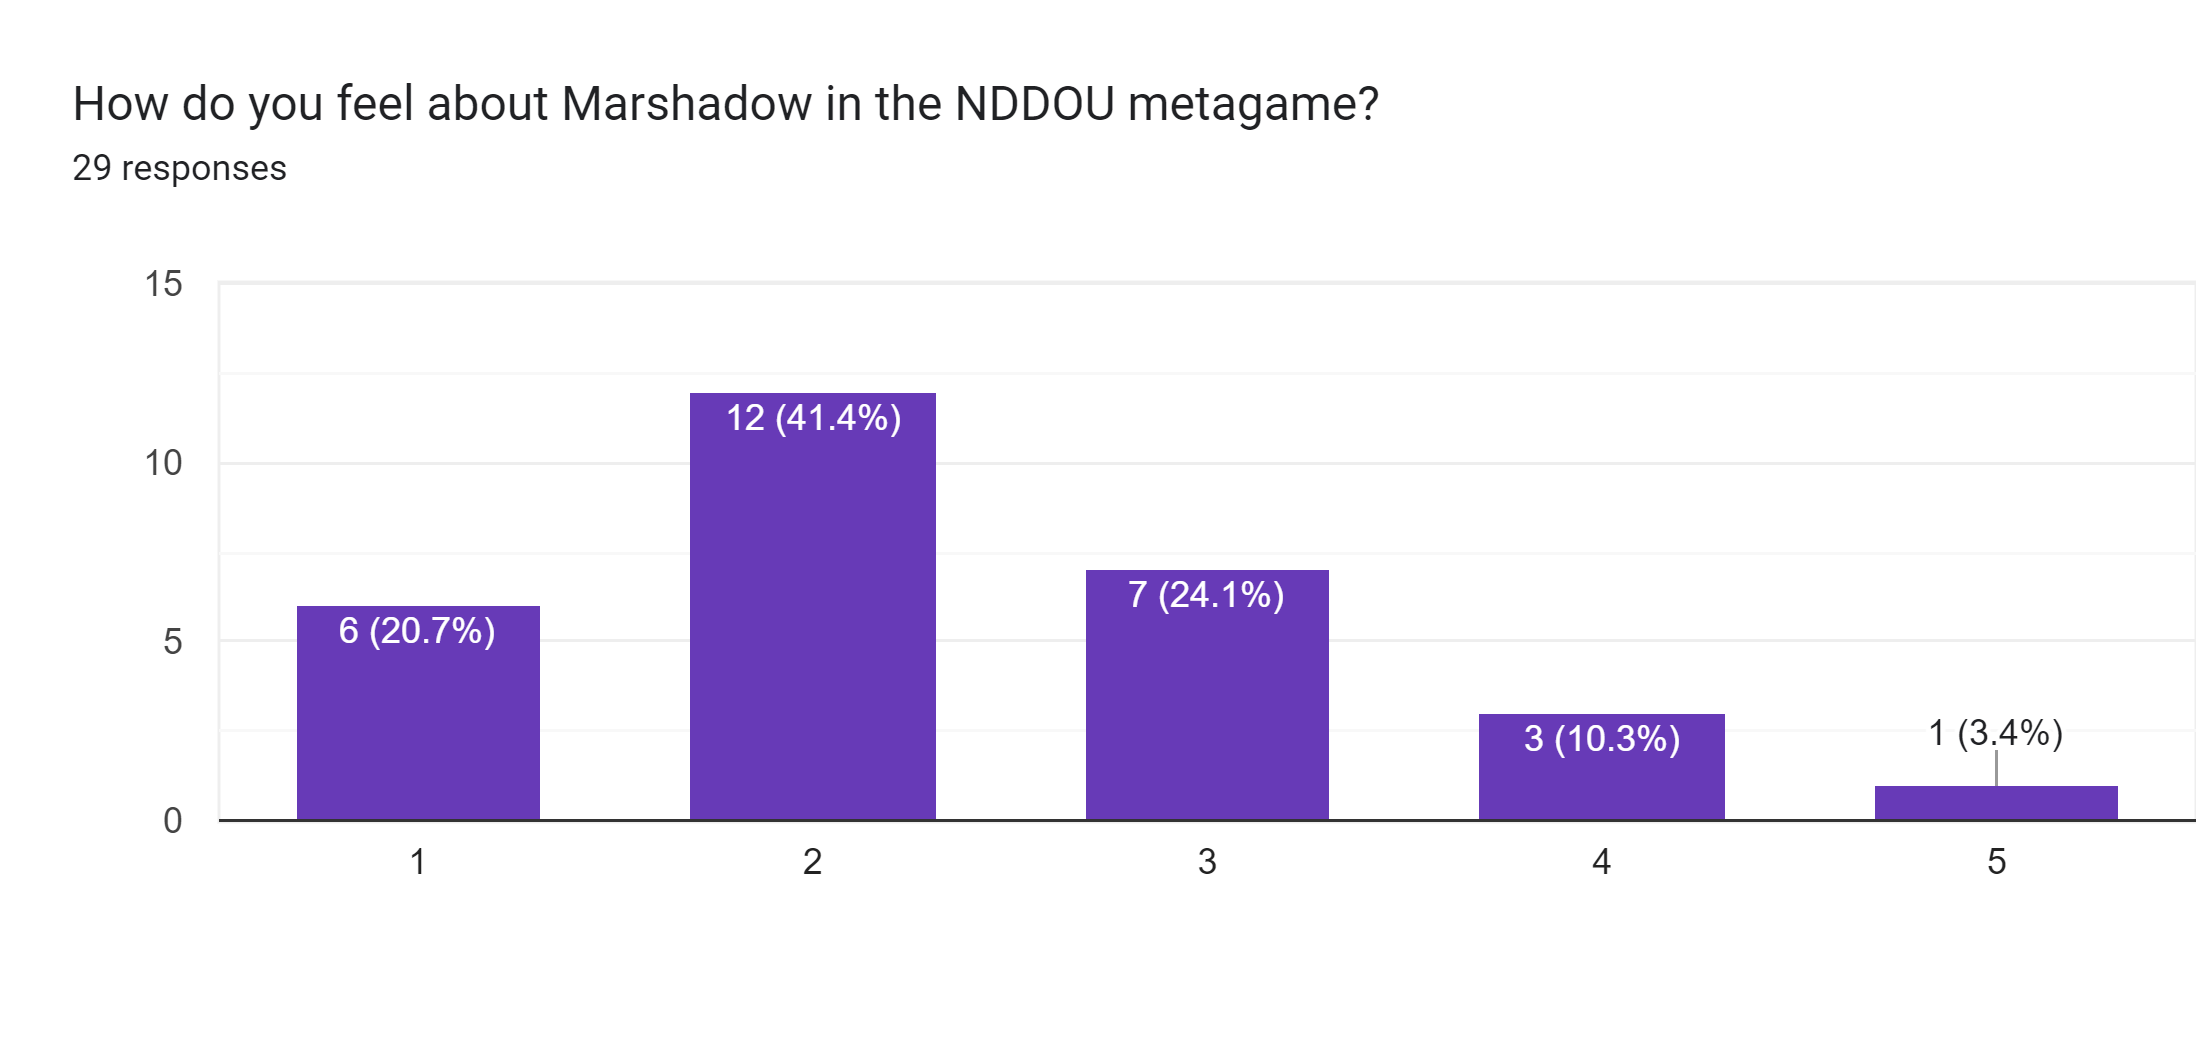 Forms response chart. Question title: How do you feel about Marshadow in the NDDOU metagame?. Number of responses: 29 responses.